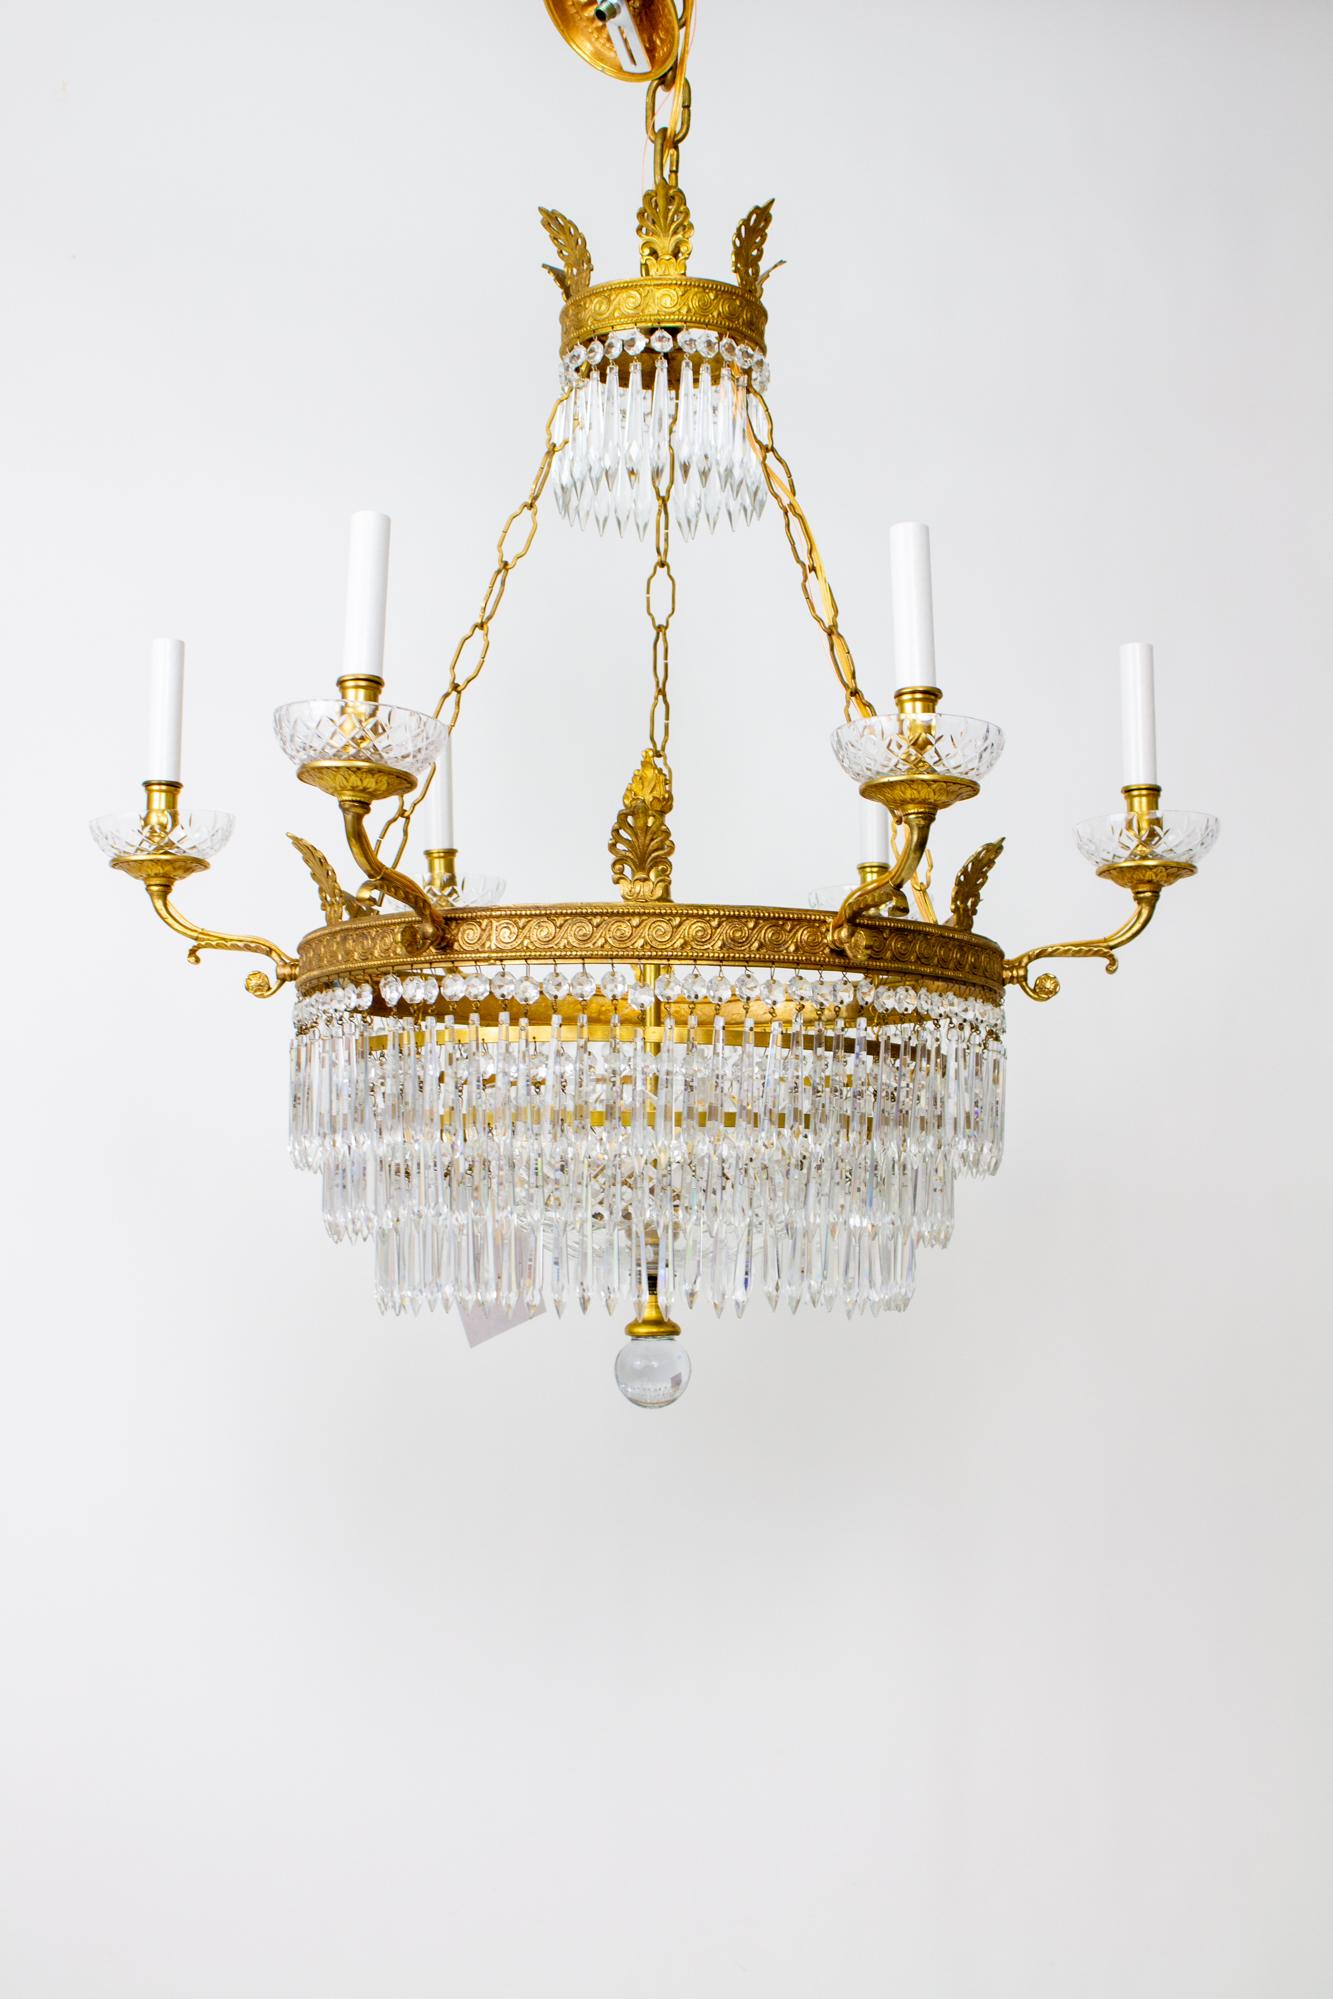 European Six Arm Brass and Crystal Empire style Chandelier For Sale